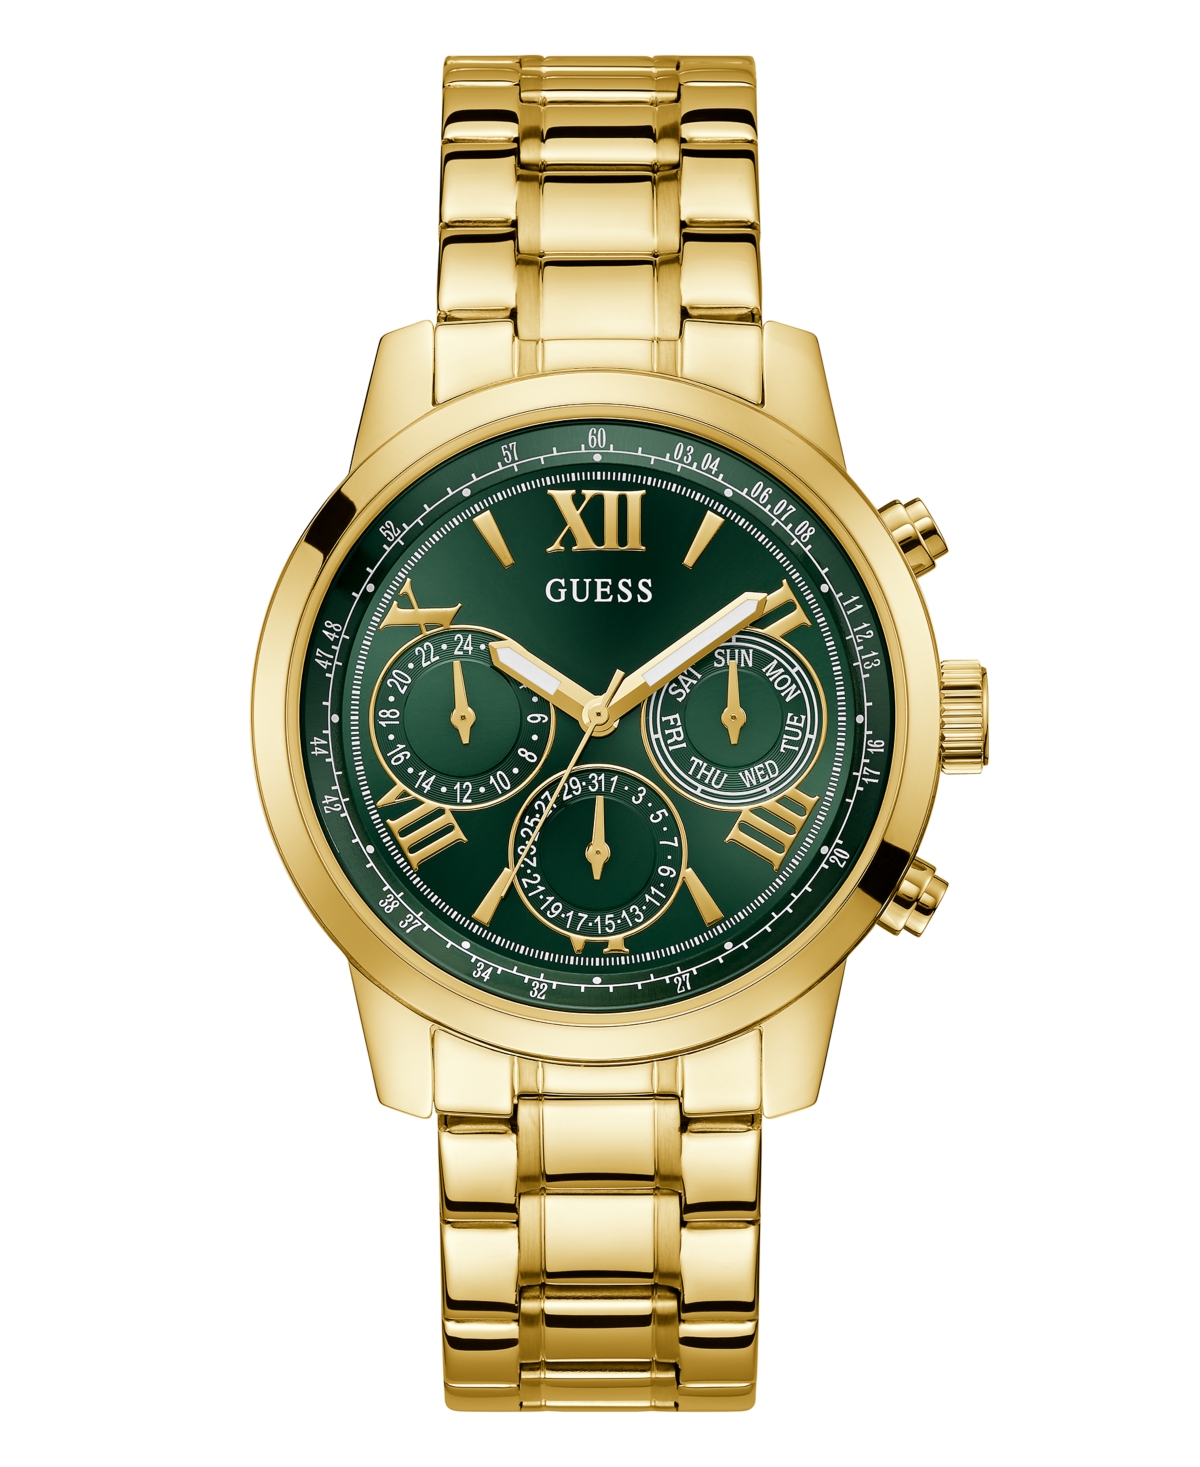 Guess Women's Multi-function Gold-tone Stainless Steel Watch 42mm